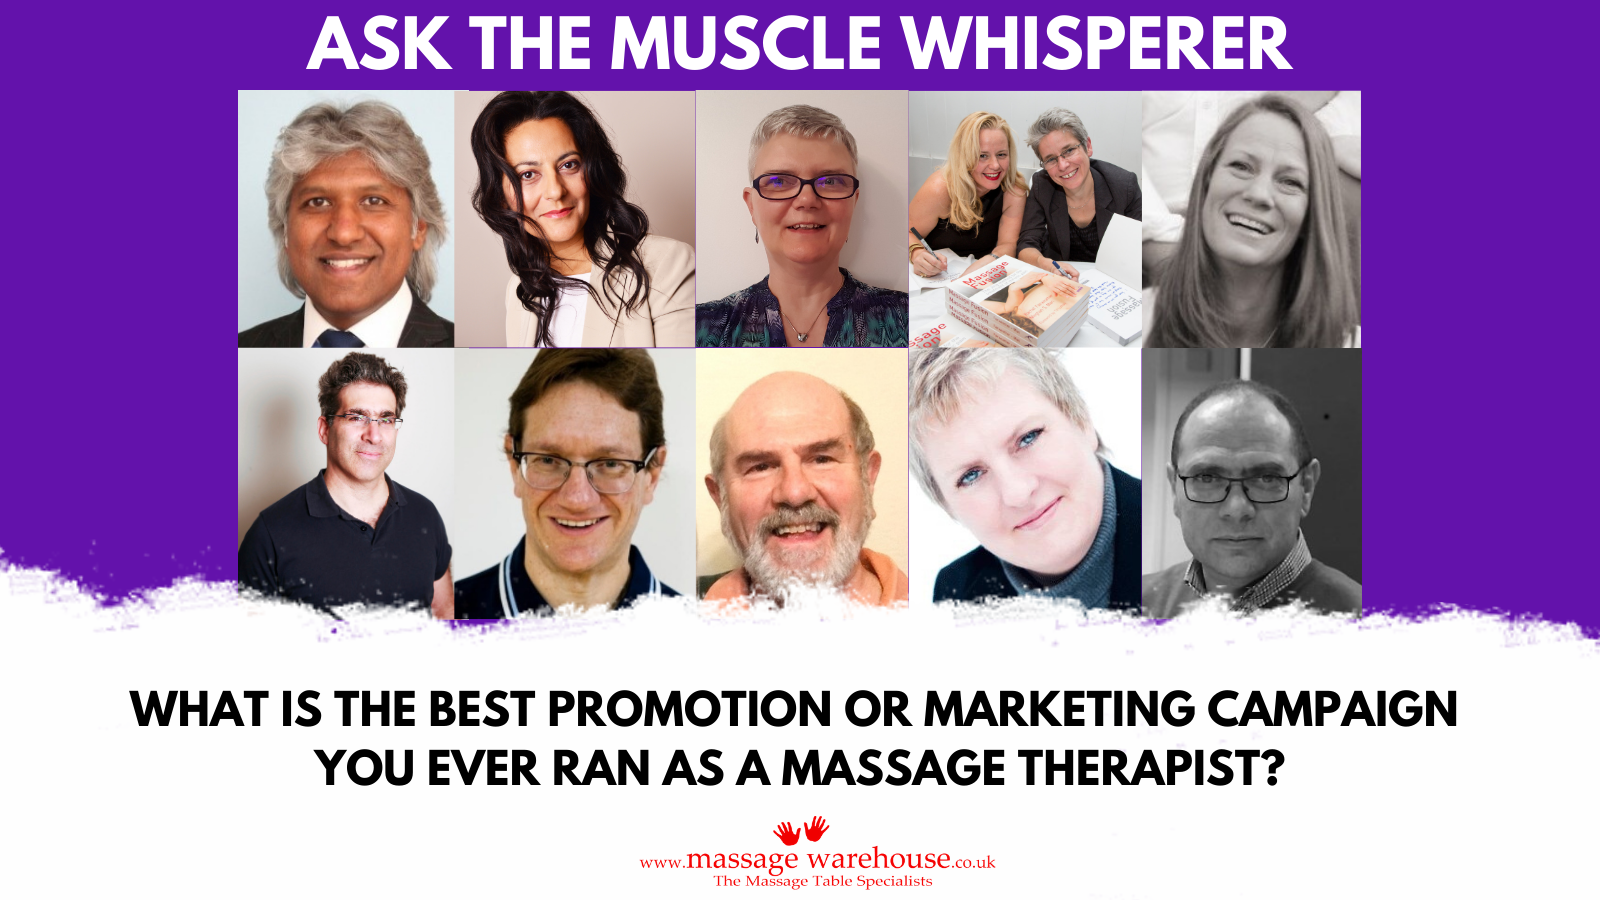 What is the best promotion or marketing campaign you ever ran as a massage therapist? (Ask the Muscle Whisperer Series)